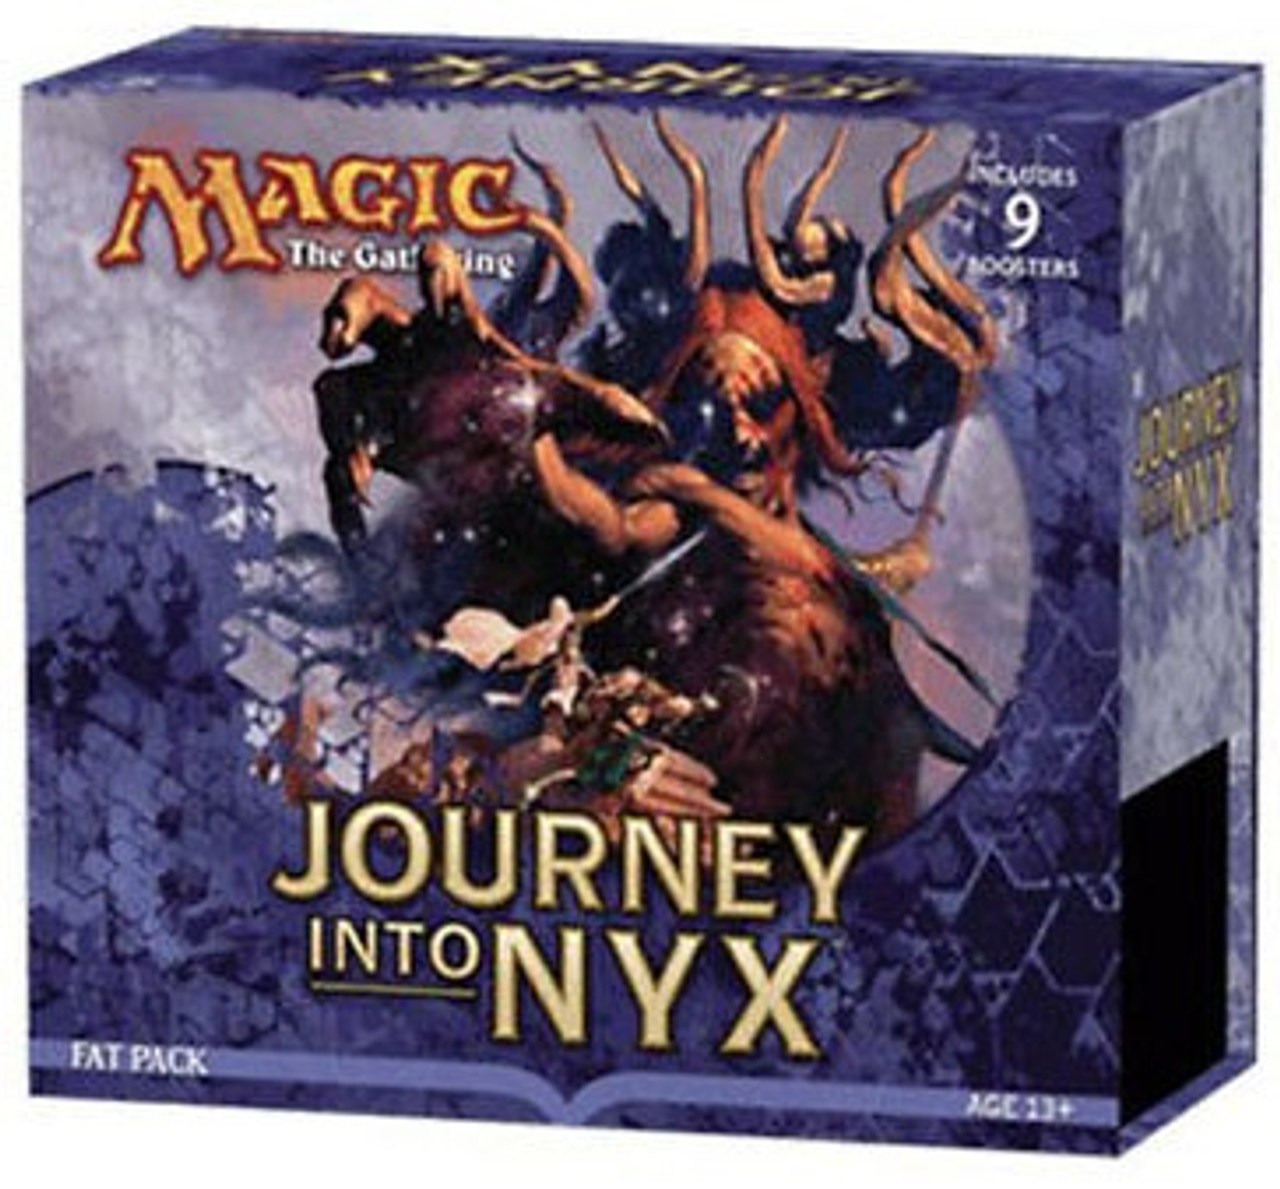 Magic The Gathering Trading Card Game Journey Into Nyx Fat Pack Wizards Of The Coast Toywiz - codes promo roblox nyx black friday sale 2019